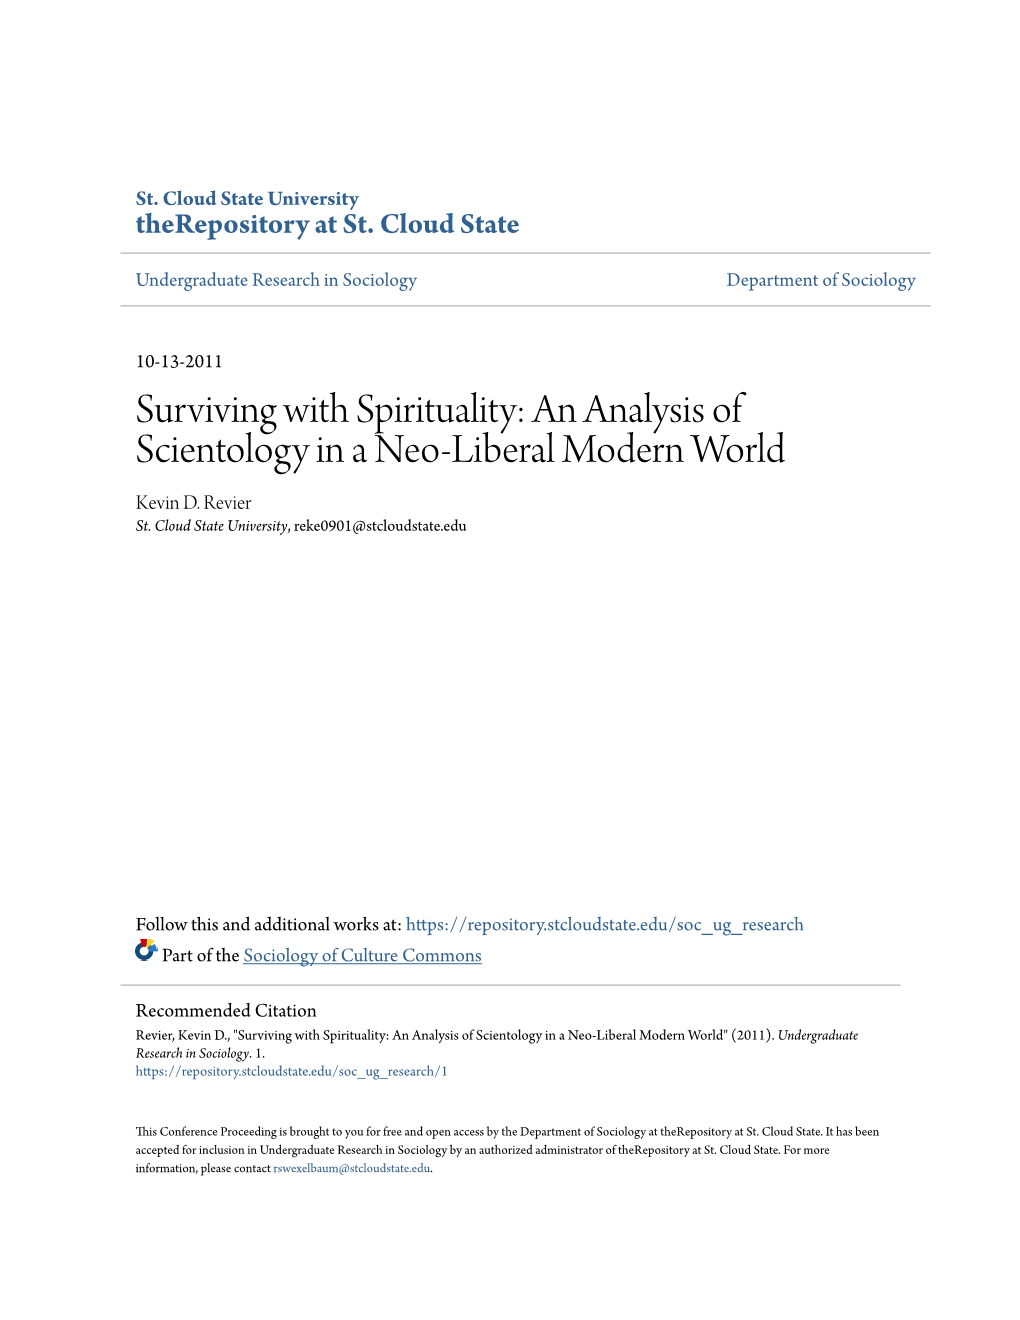 Surviving with Spirituality: an Analysis of Scientology in a Neo-Liberal Modern World Kevin D